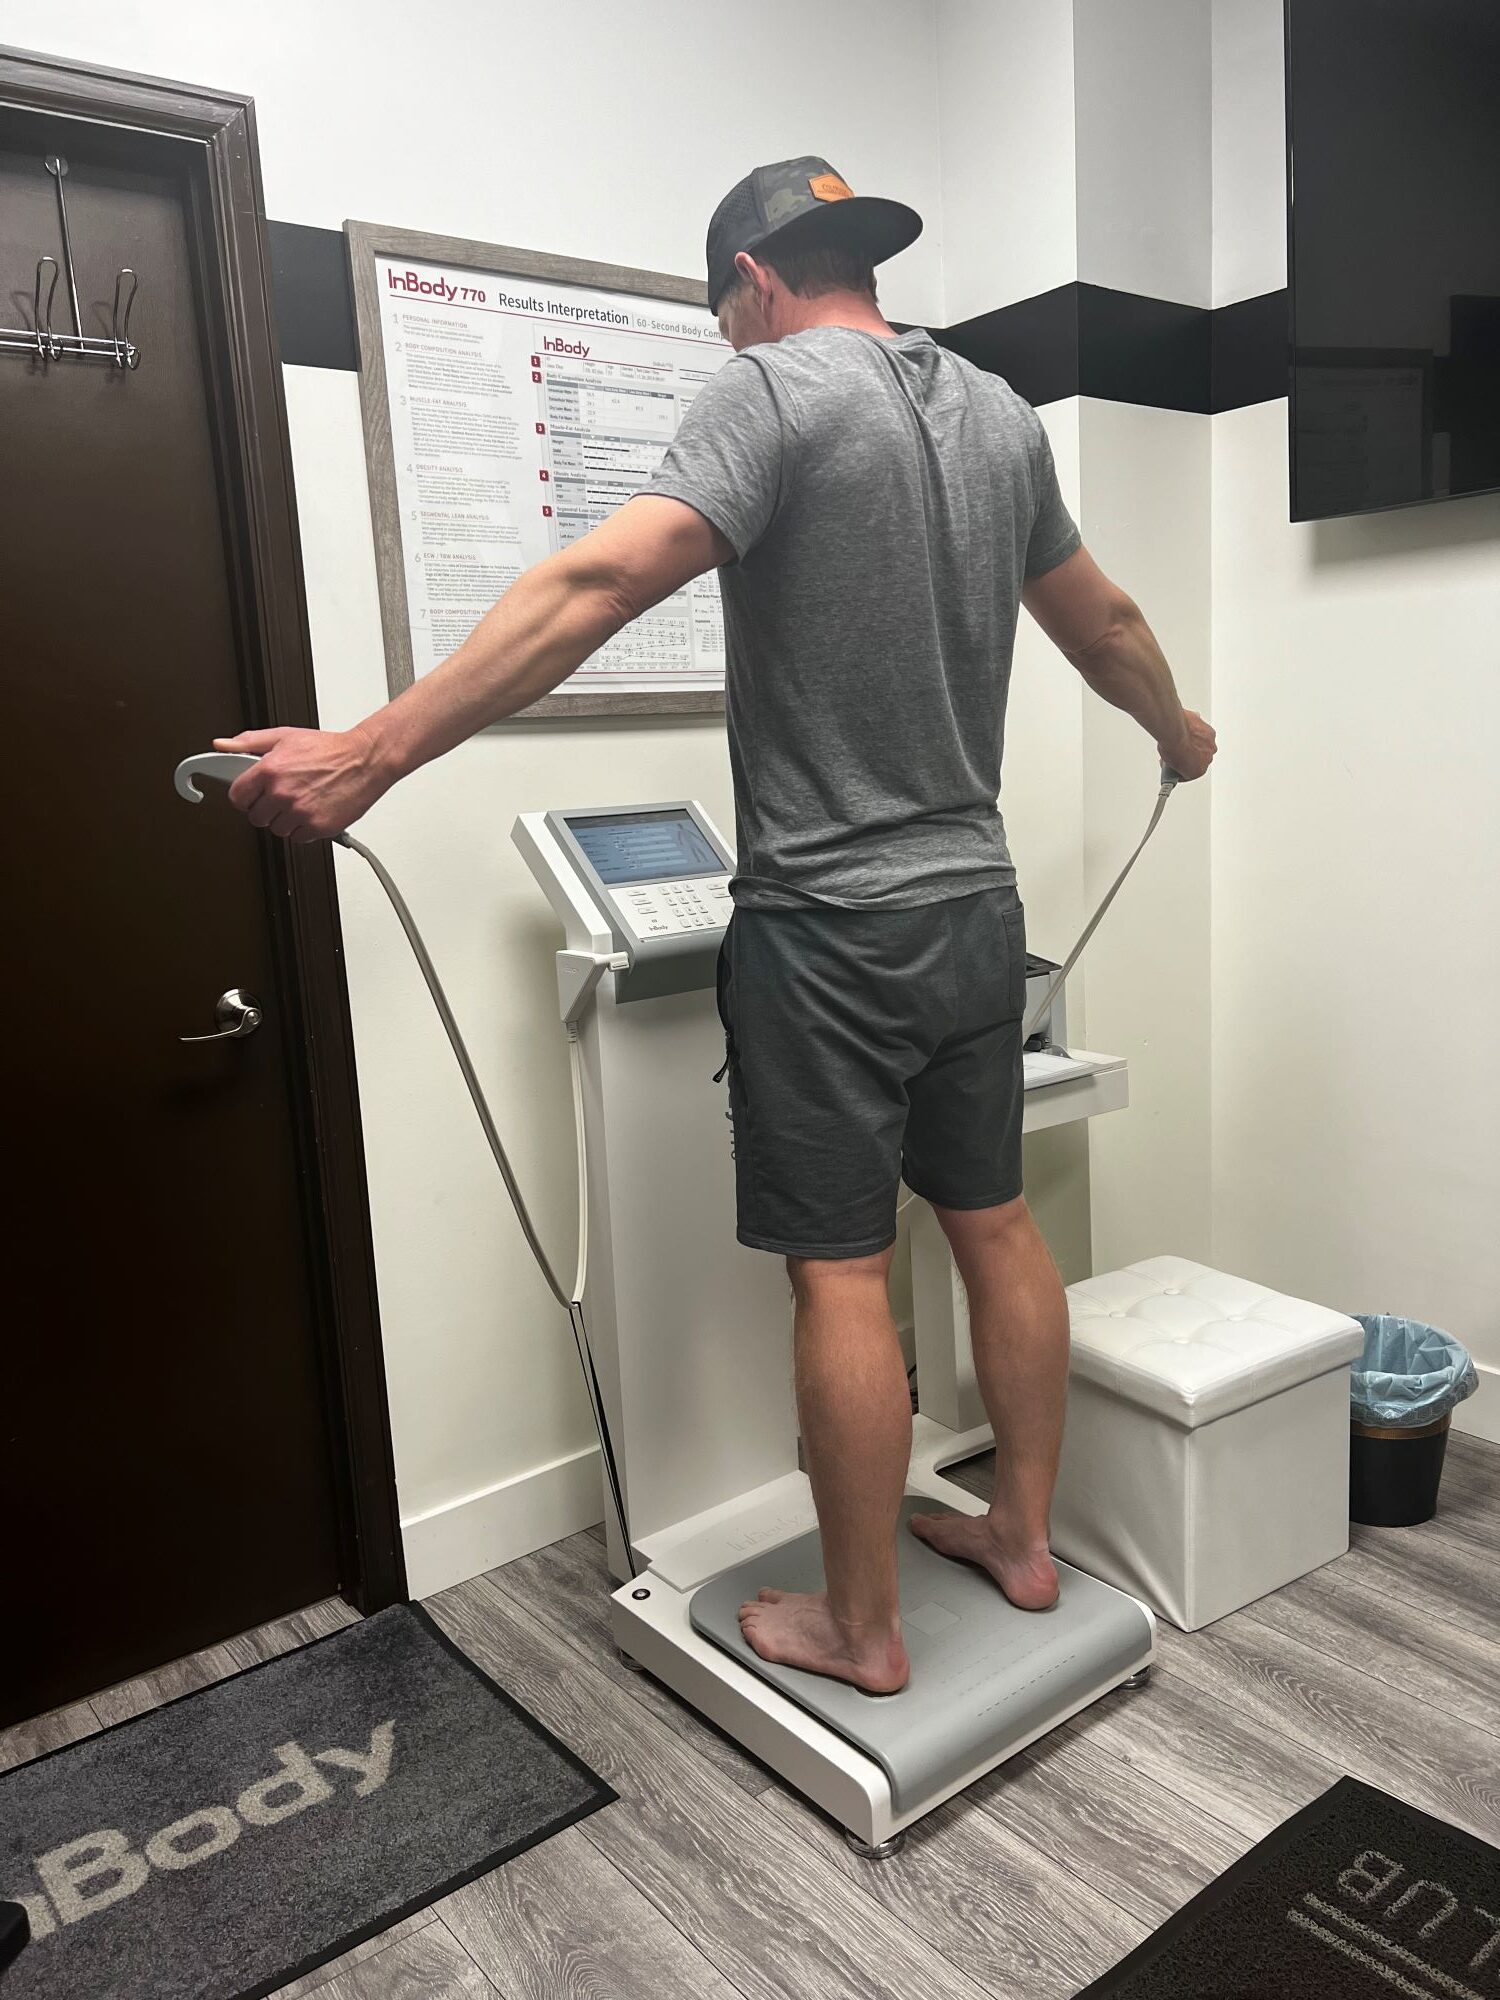 Man standing on InBody 770 body composition machine and holding handles at AFAC gym